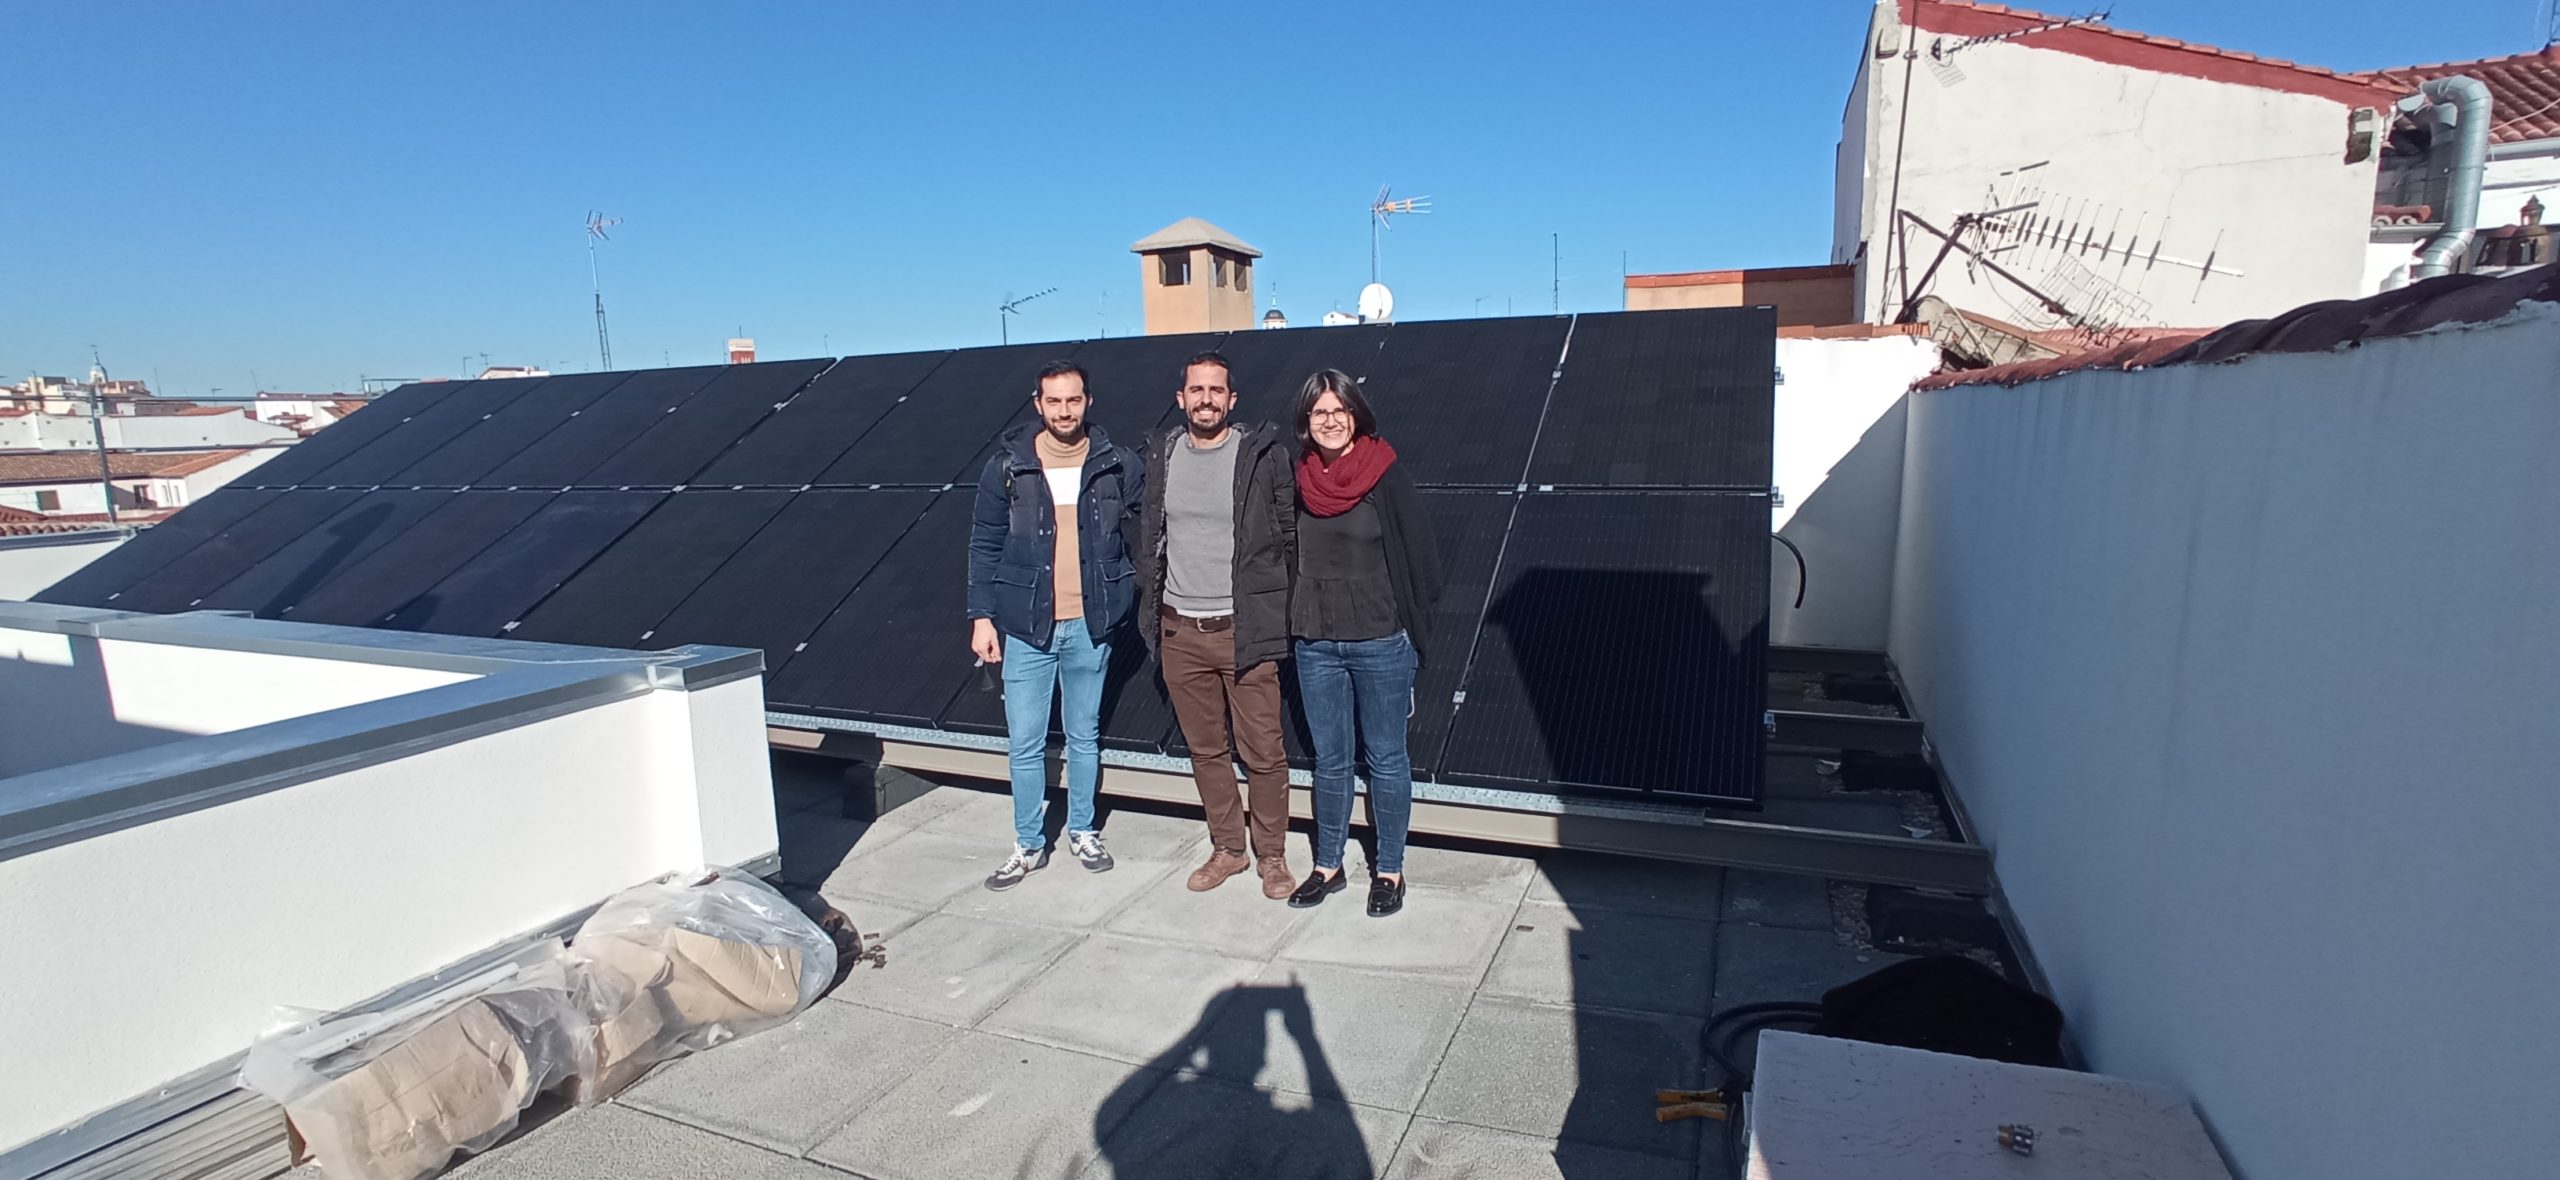 Technical visit in the Madrid demo site